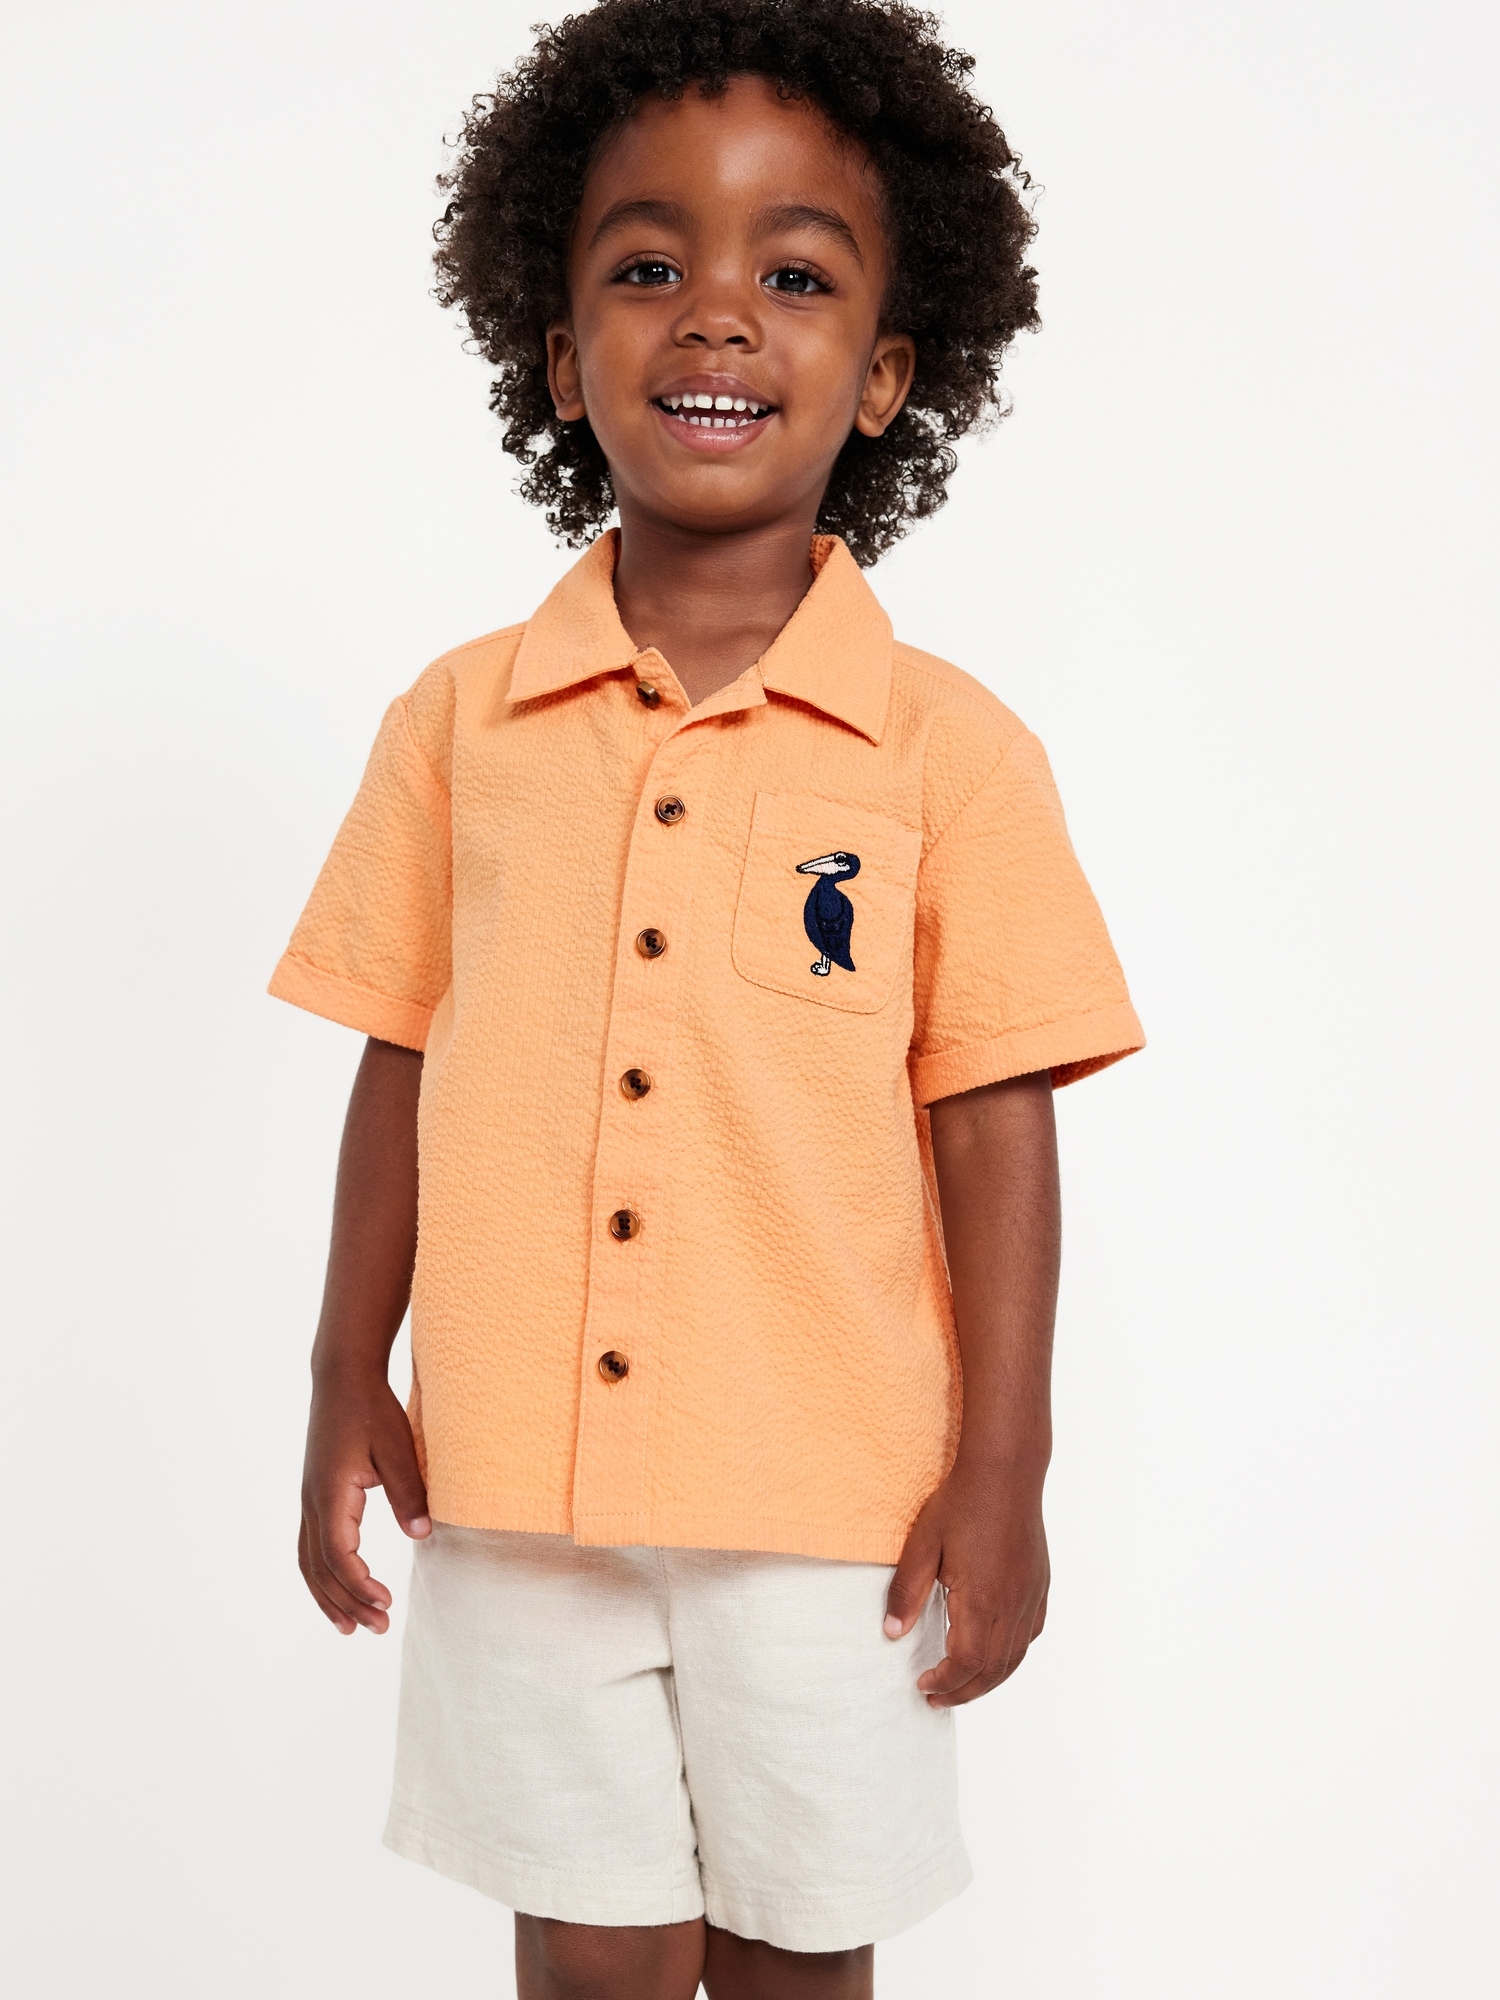 Textured Graphic Pocket Shirt for Toddler Boys